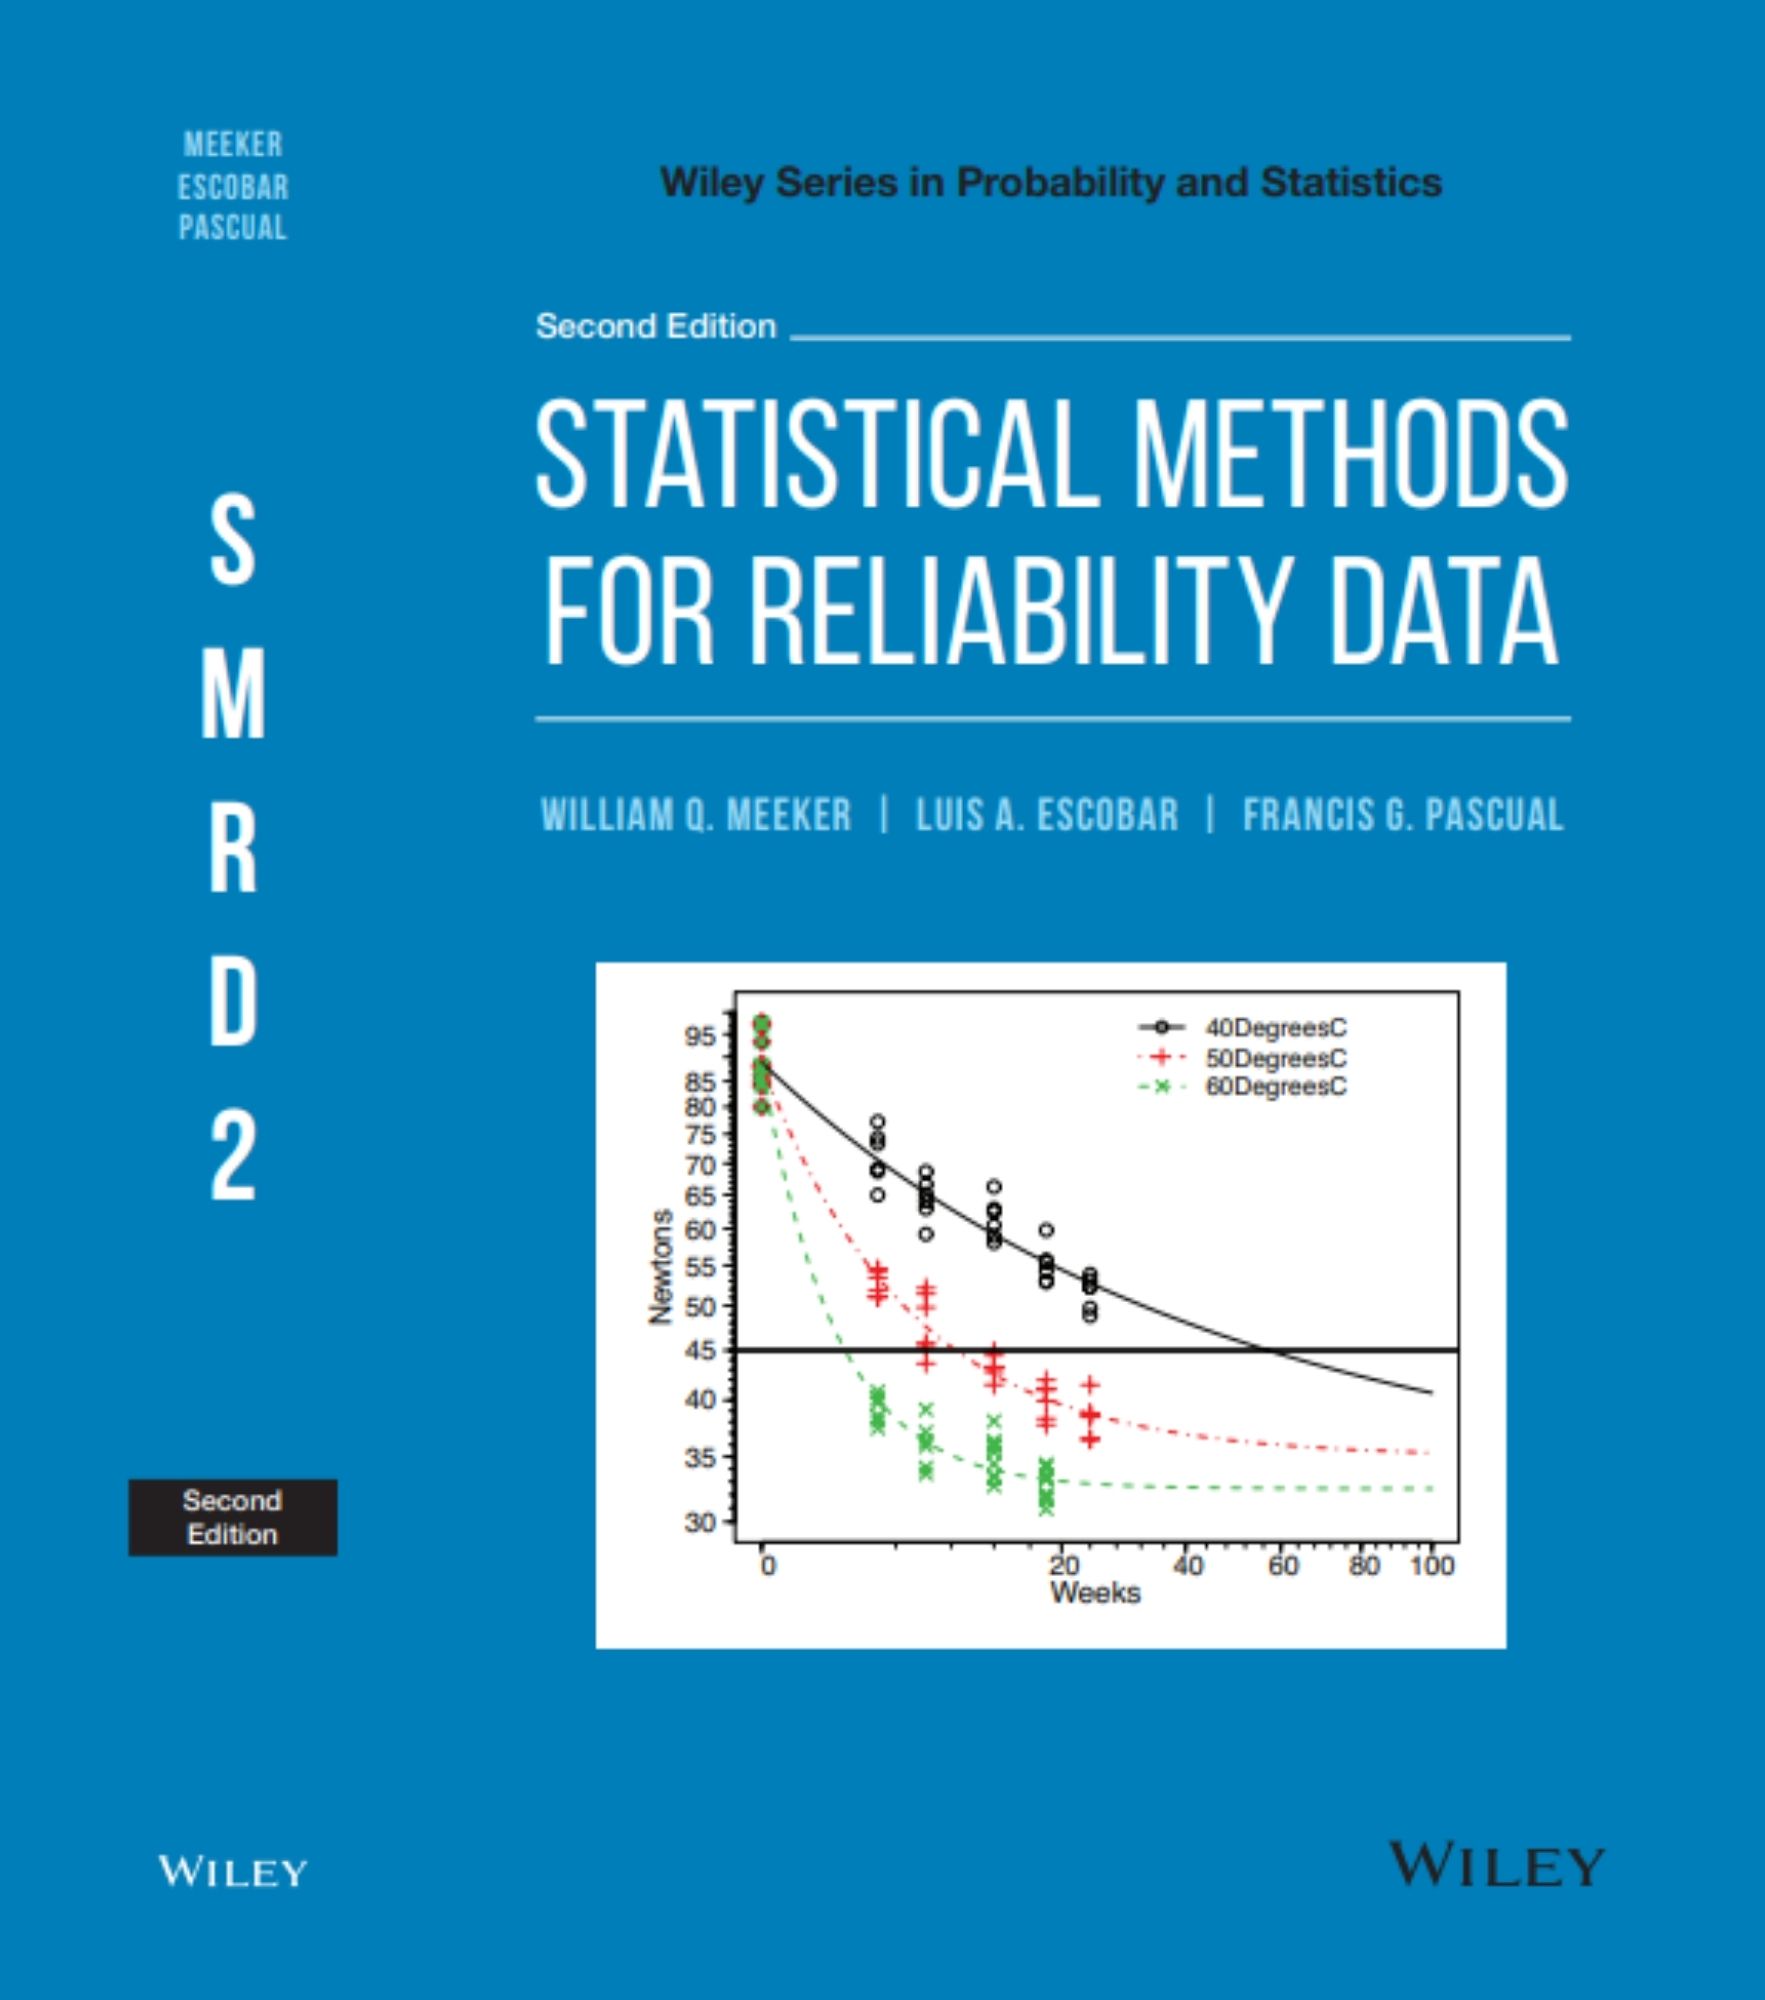 Cover of Statistical Methods for Reliability Data textbook